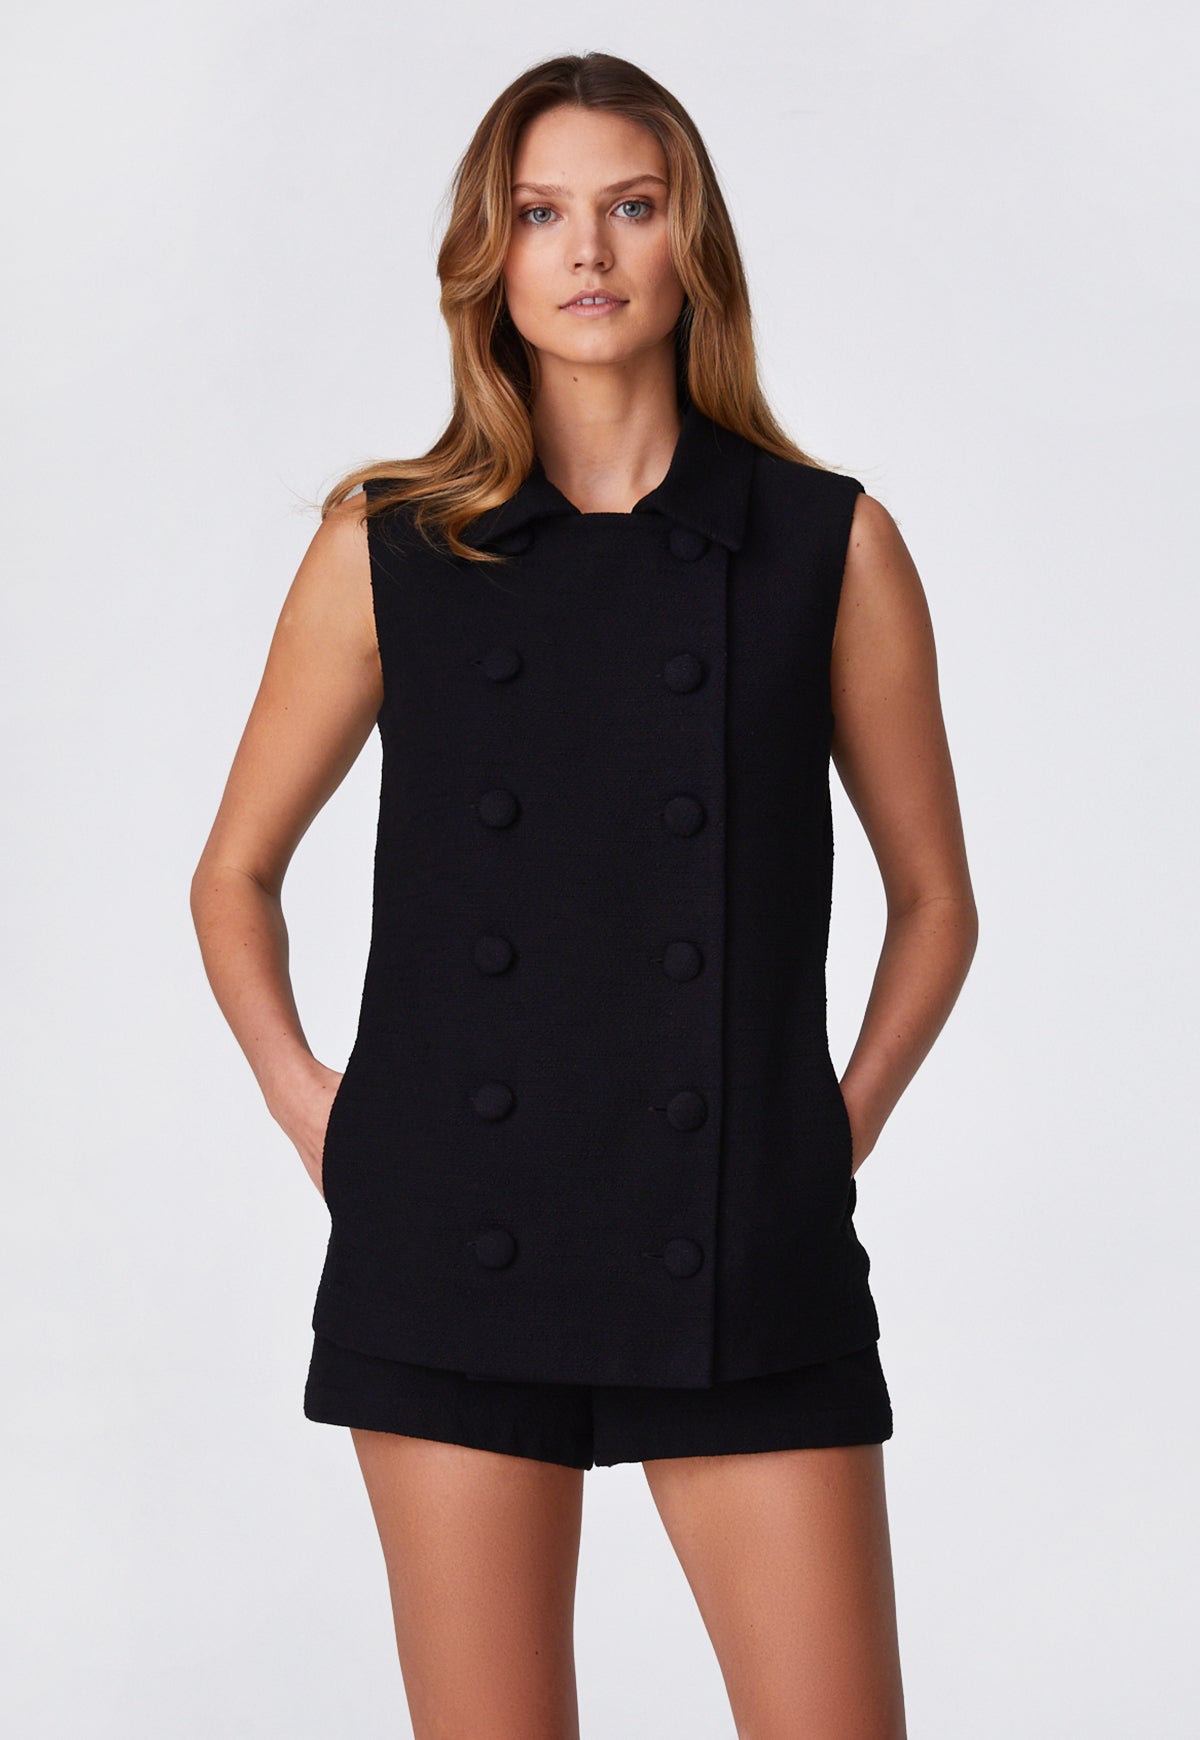 THE DOUBLE BREASTED SLEEVELESS JACKET in BLACK TEXTURED COTTON